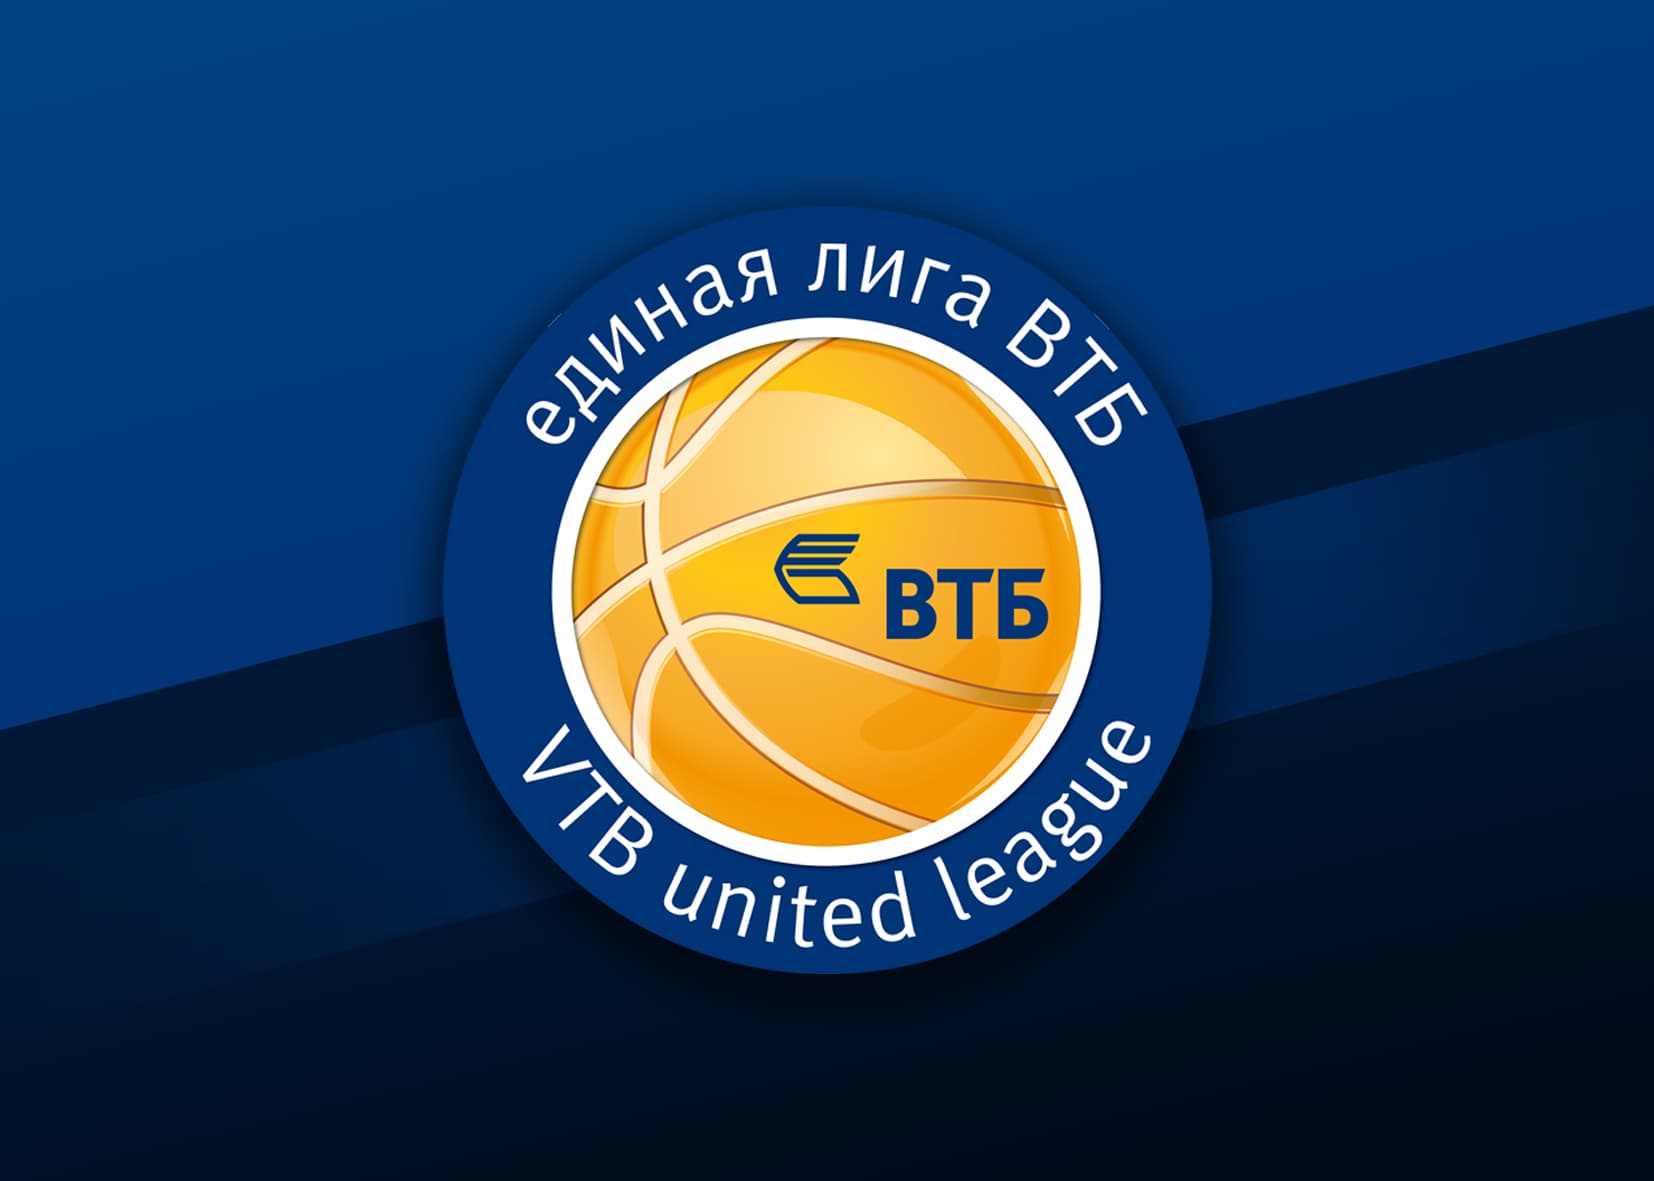 Parma – UNICS and CSKA – Enisey To Open With Minute Of Silence